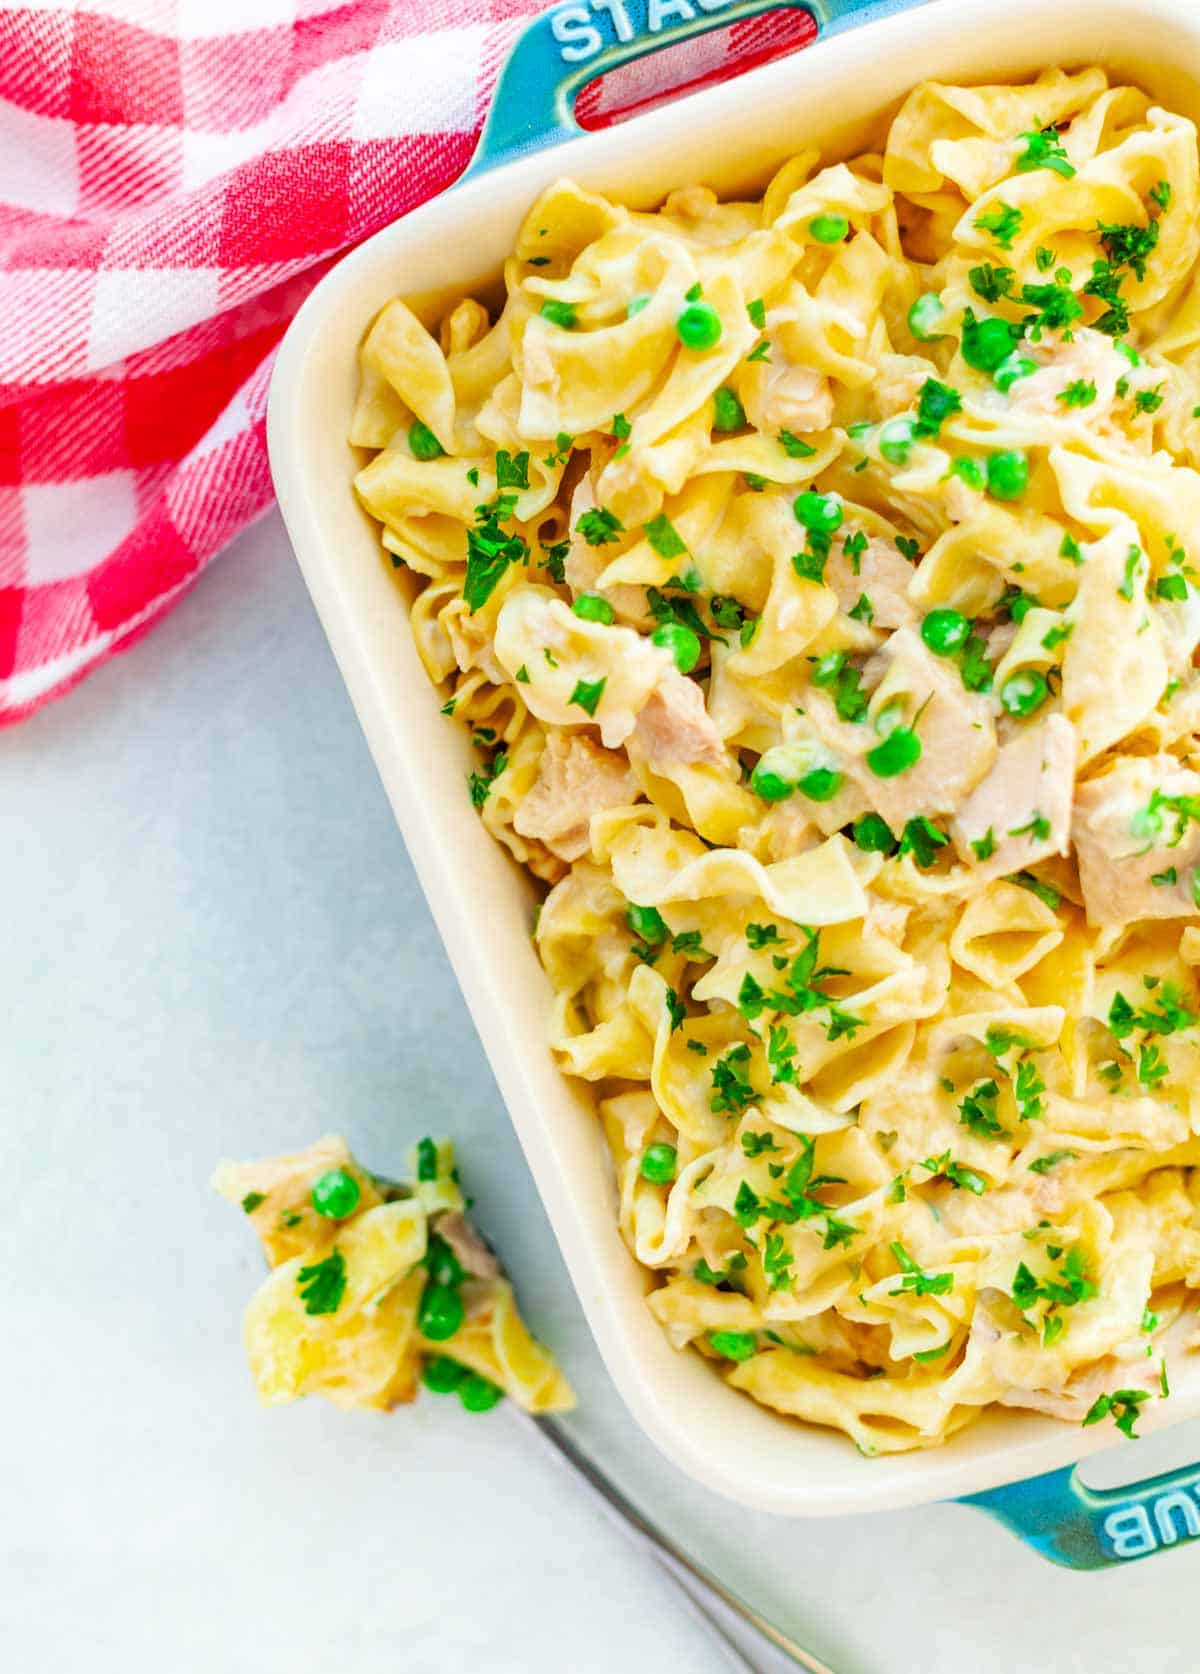 baking dish filled with tuna casserole with egg noodles and peas